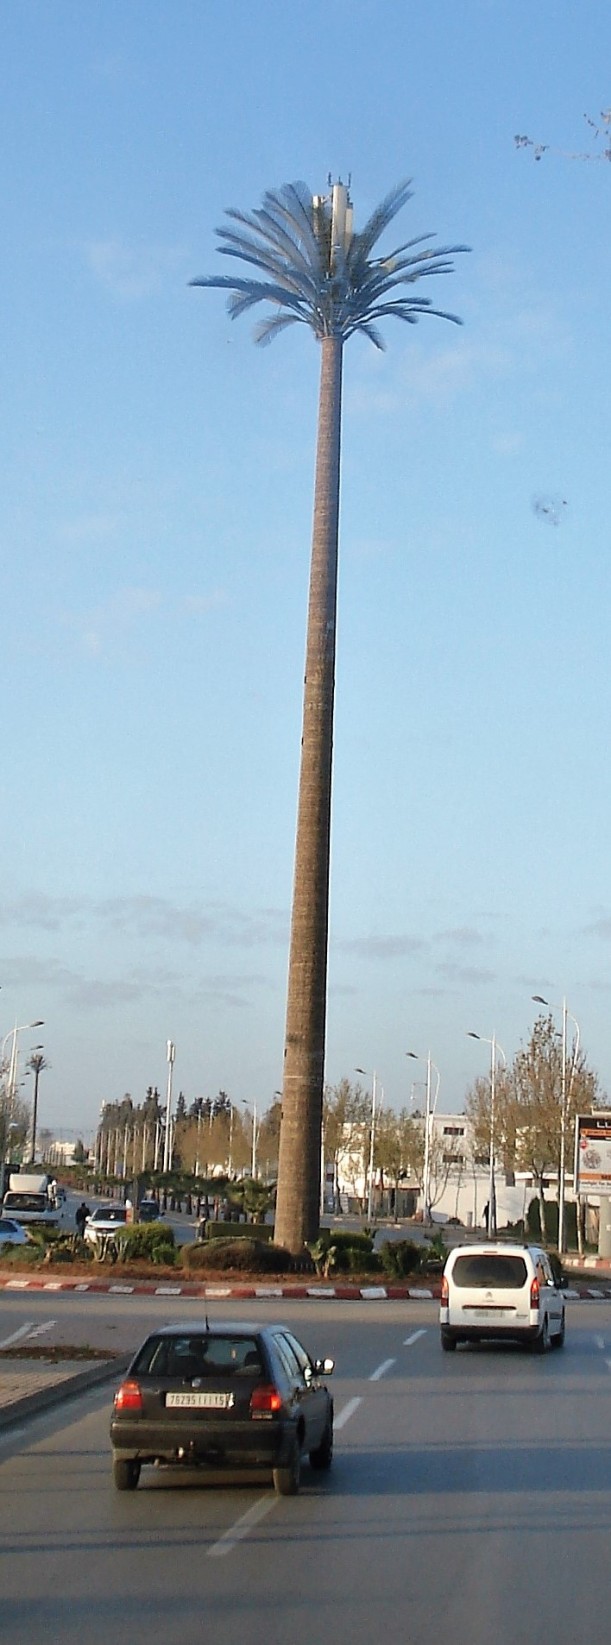 Moroccan Cell Tower